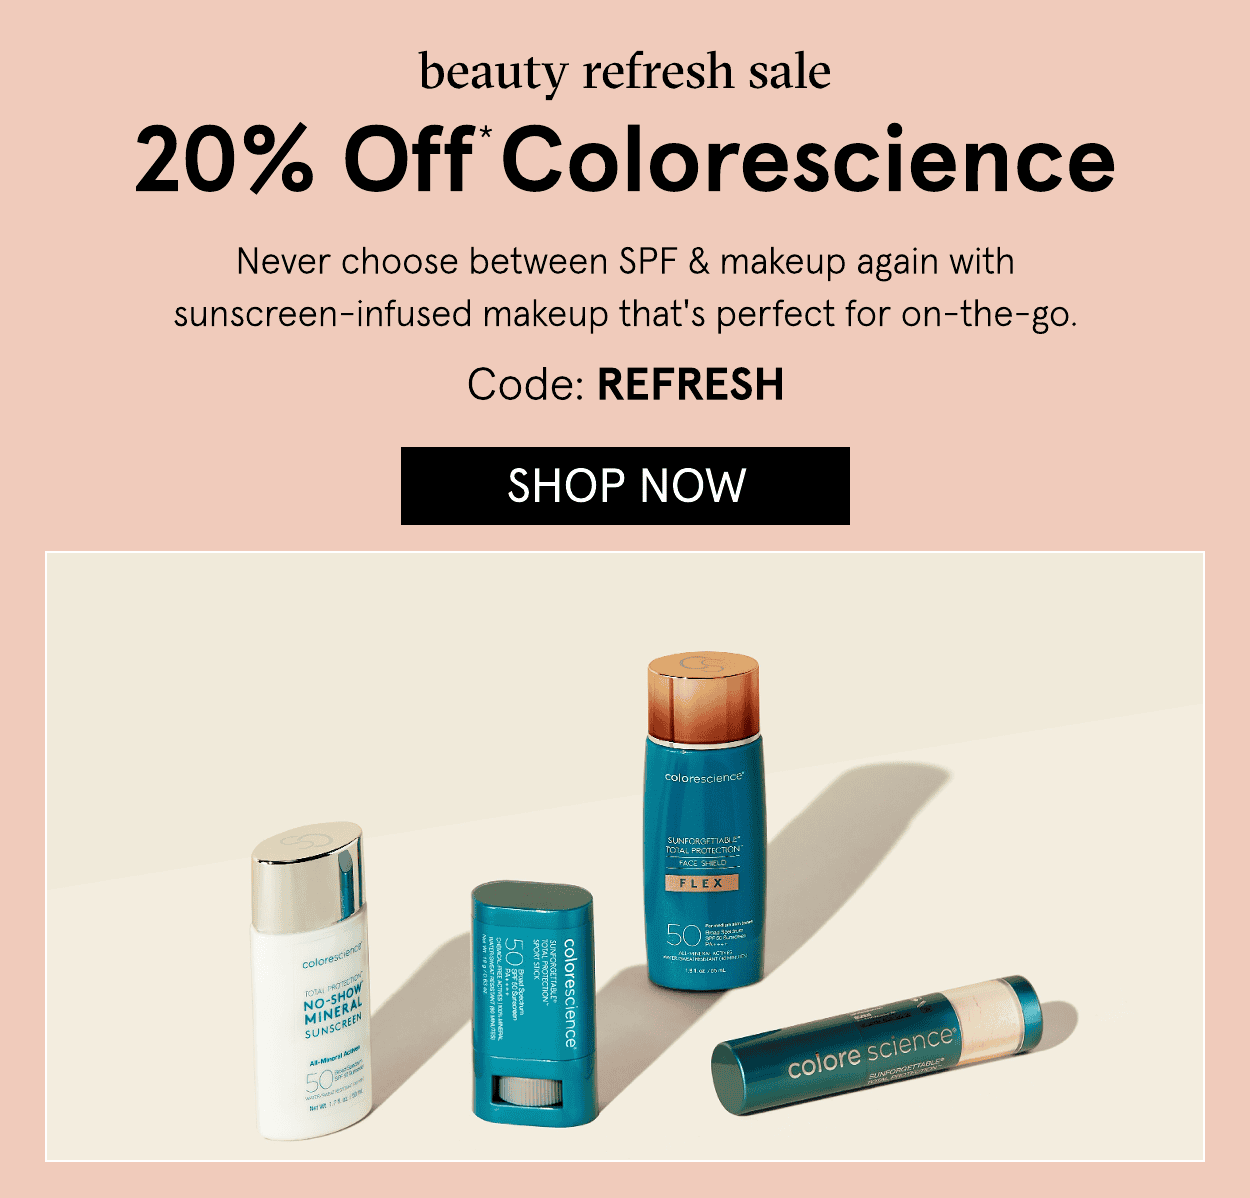 Colorescience 20% off with code: REFRESH